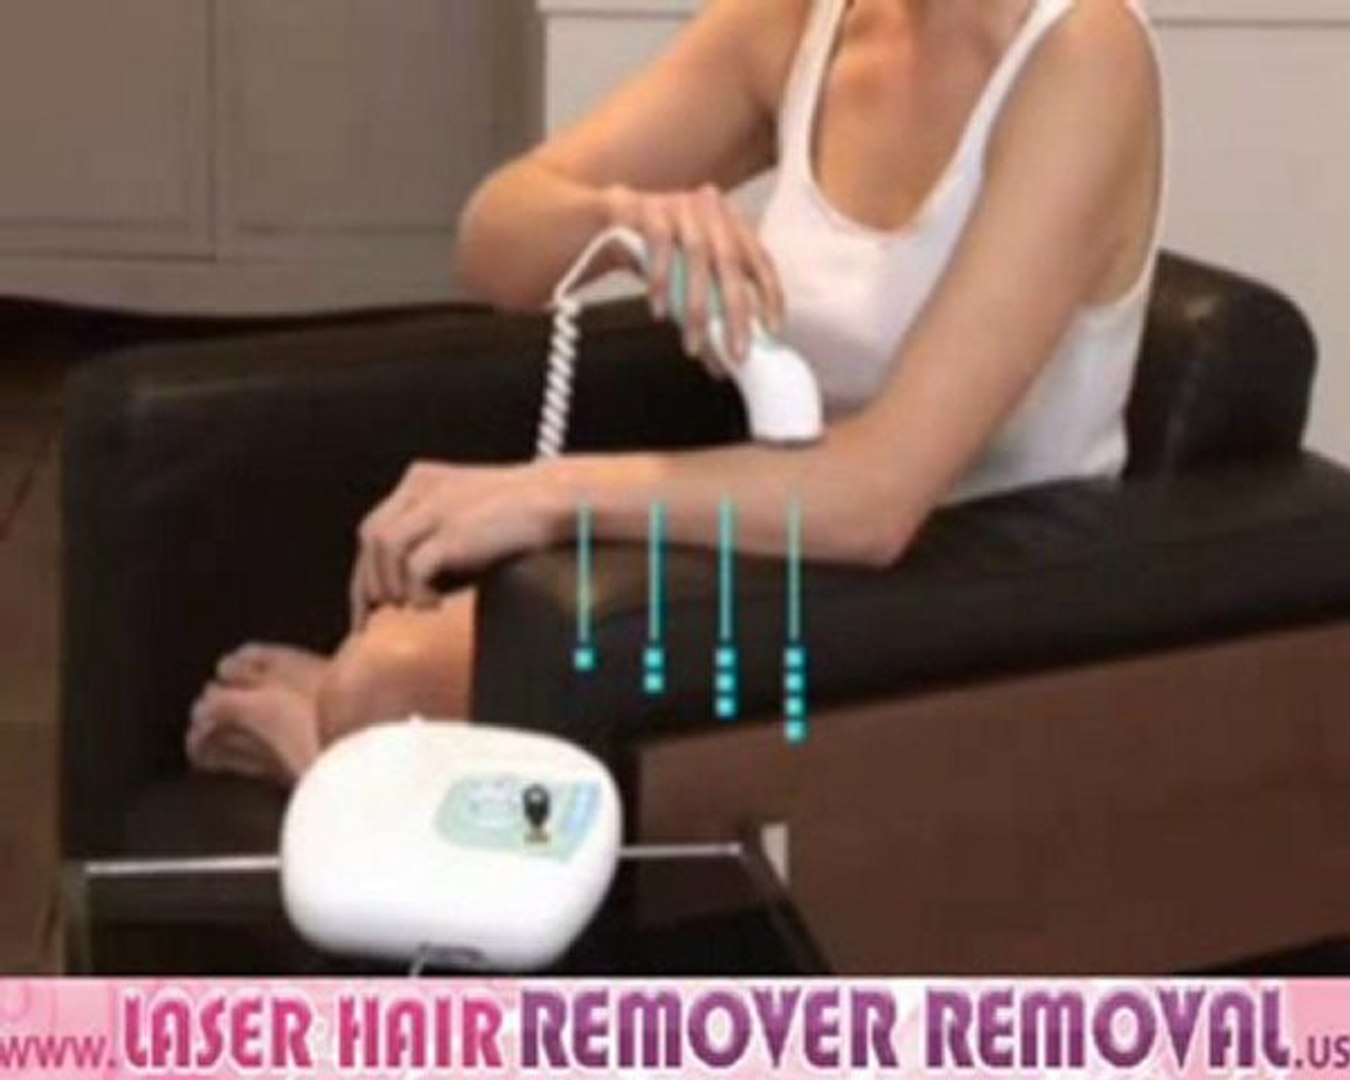 Permanent laser hair removal, Rio Scanning Laser 1/2 - video Dailymotion